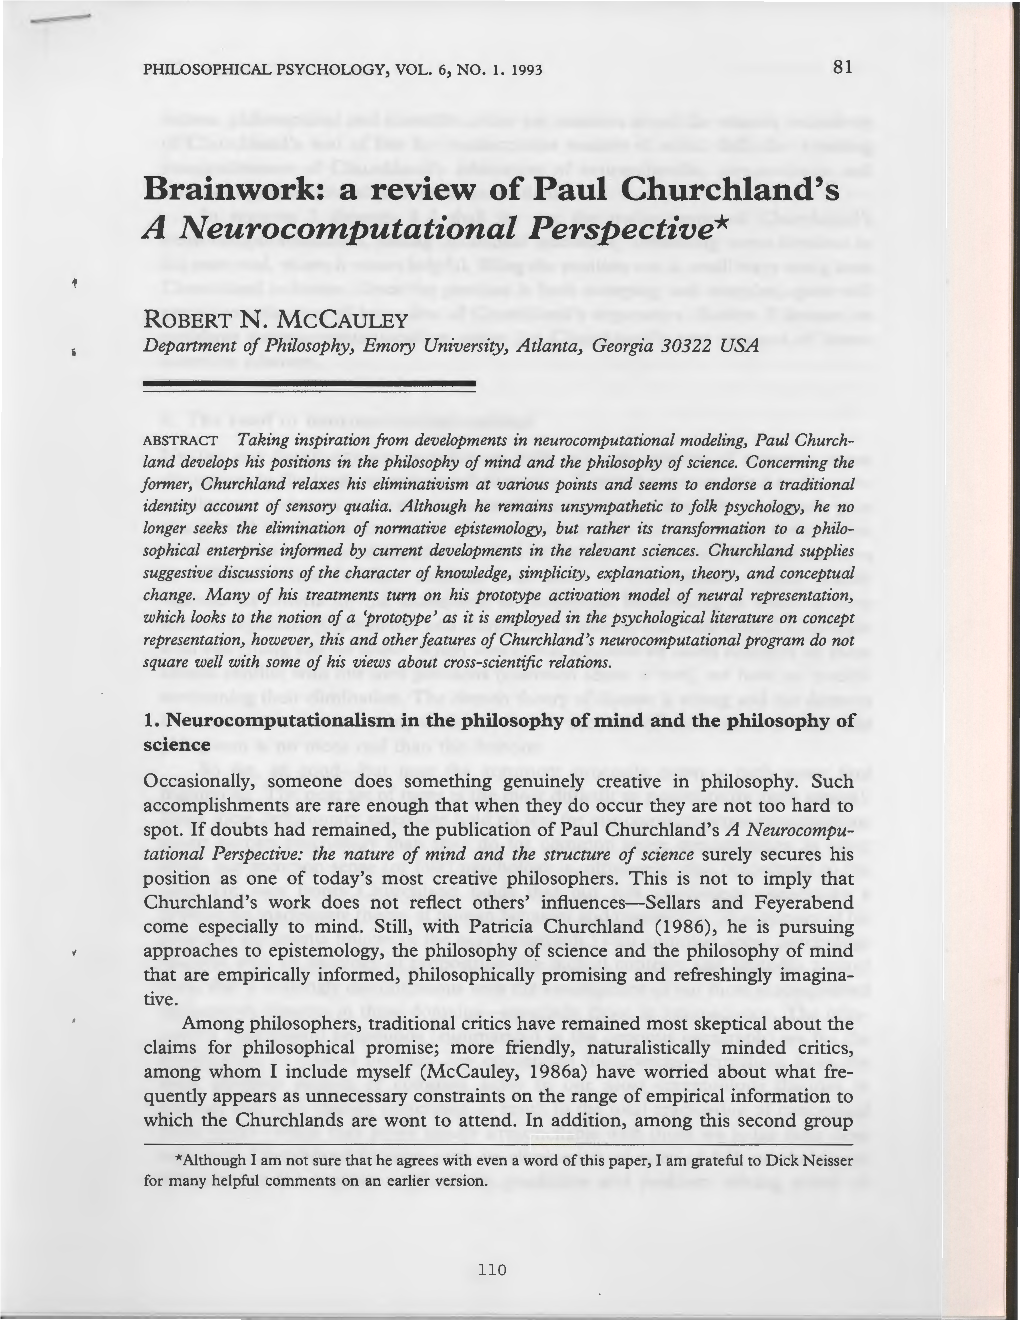 A Review of Paul Churchland's a Neurocomputational Perspective*